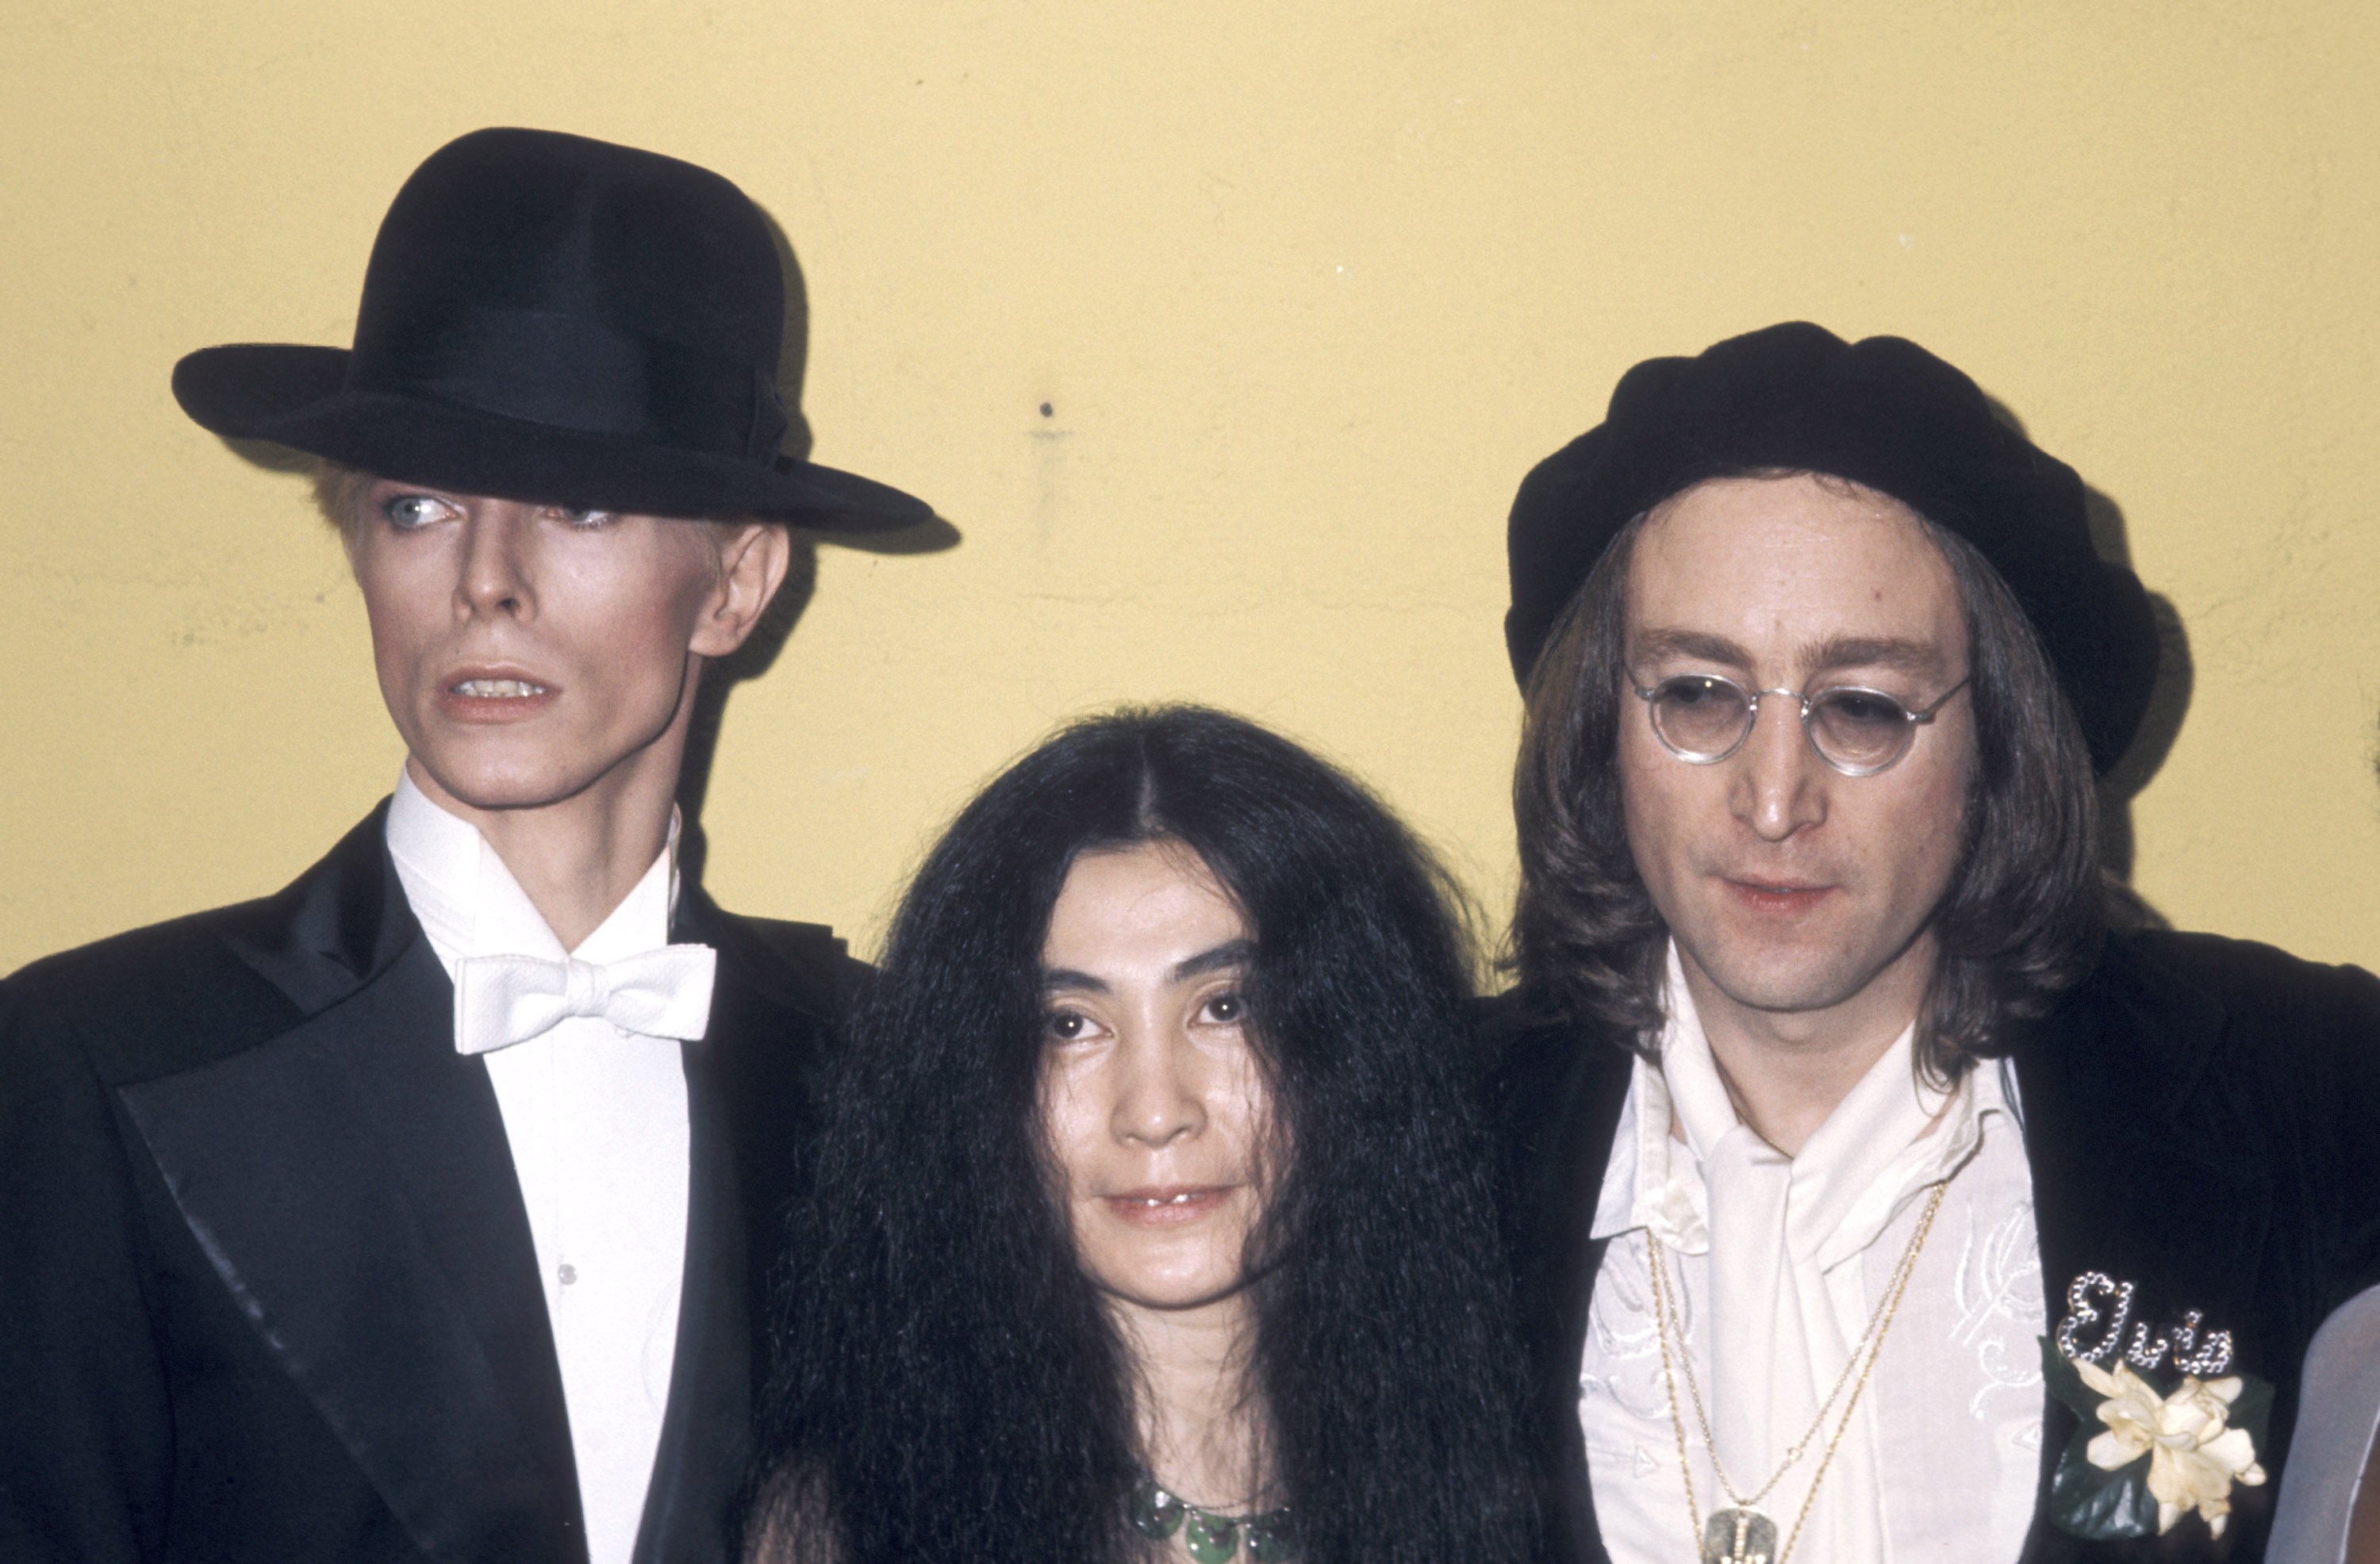 David Bowie, Yoko Ono, and John Lennon pose together against a yellow background. 